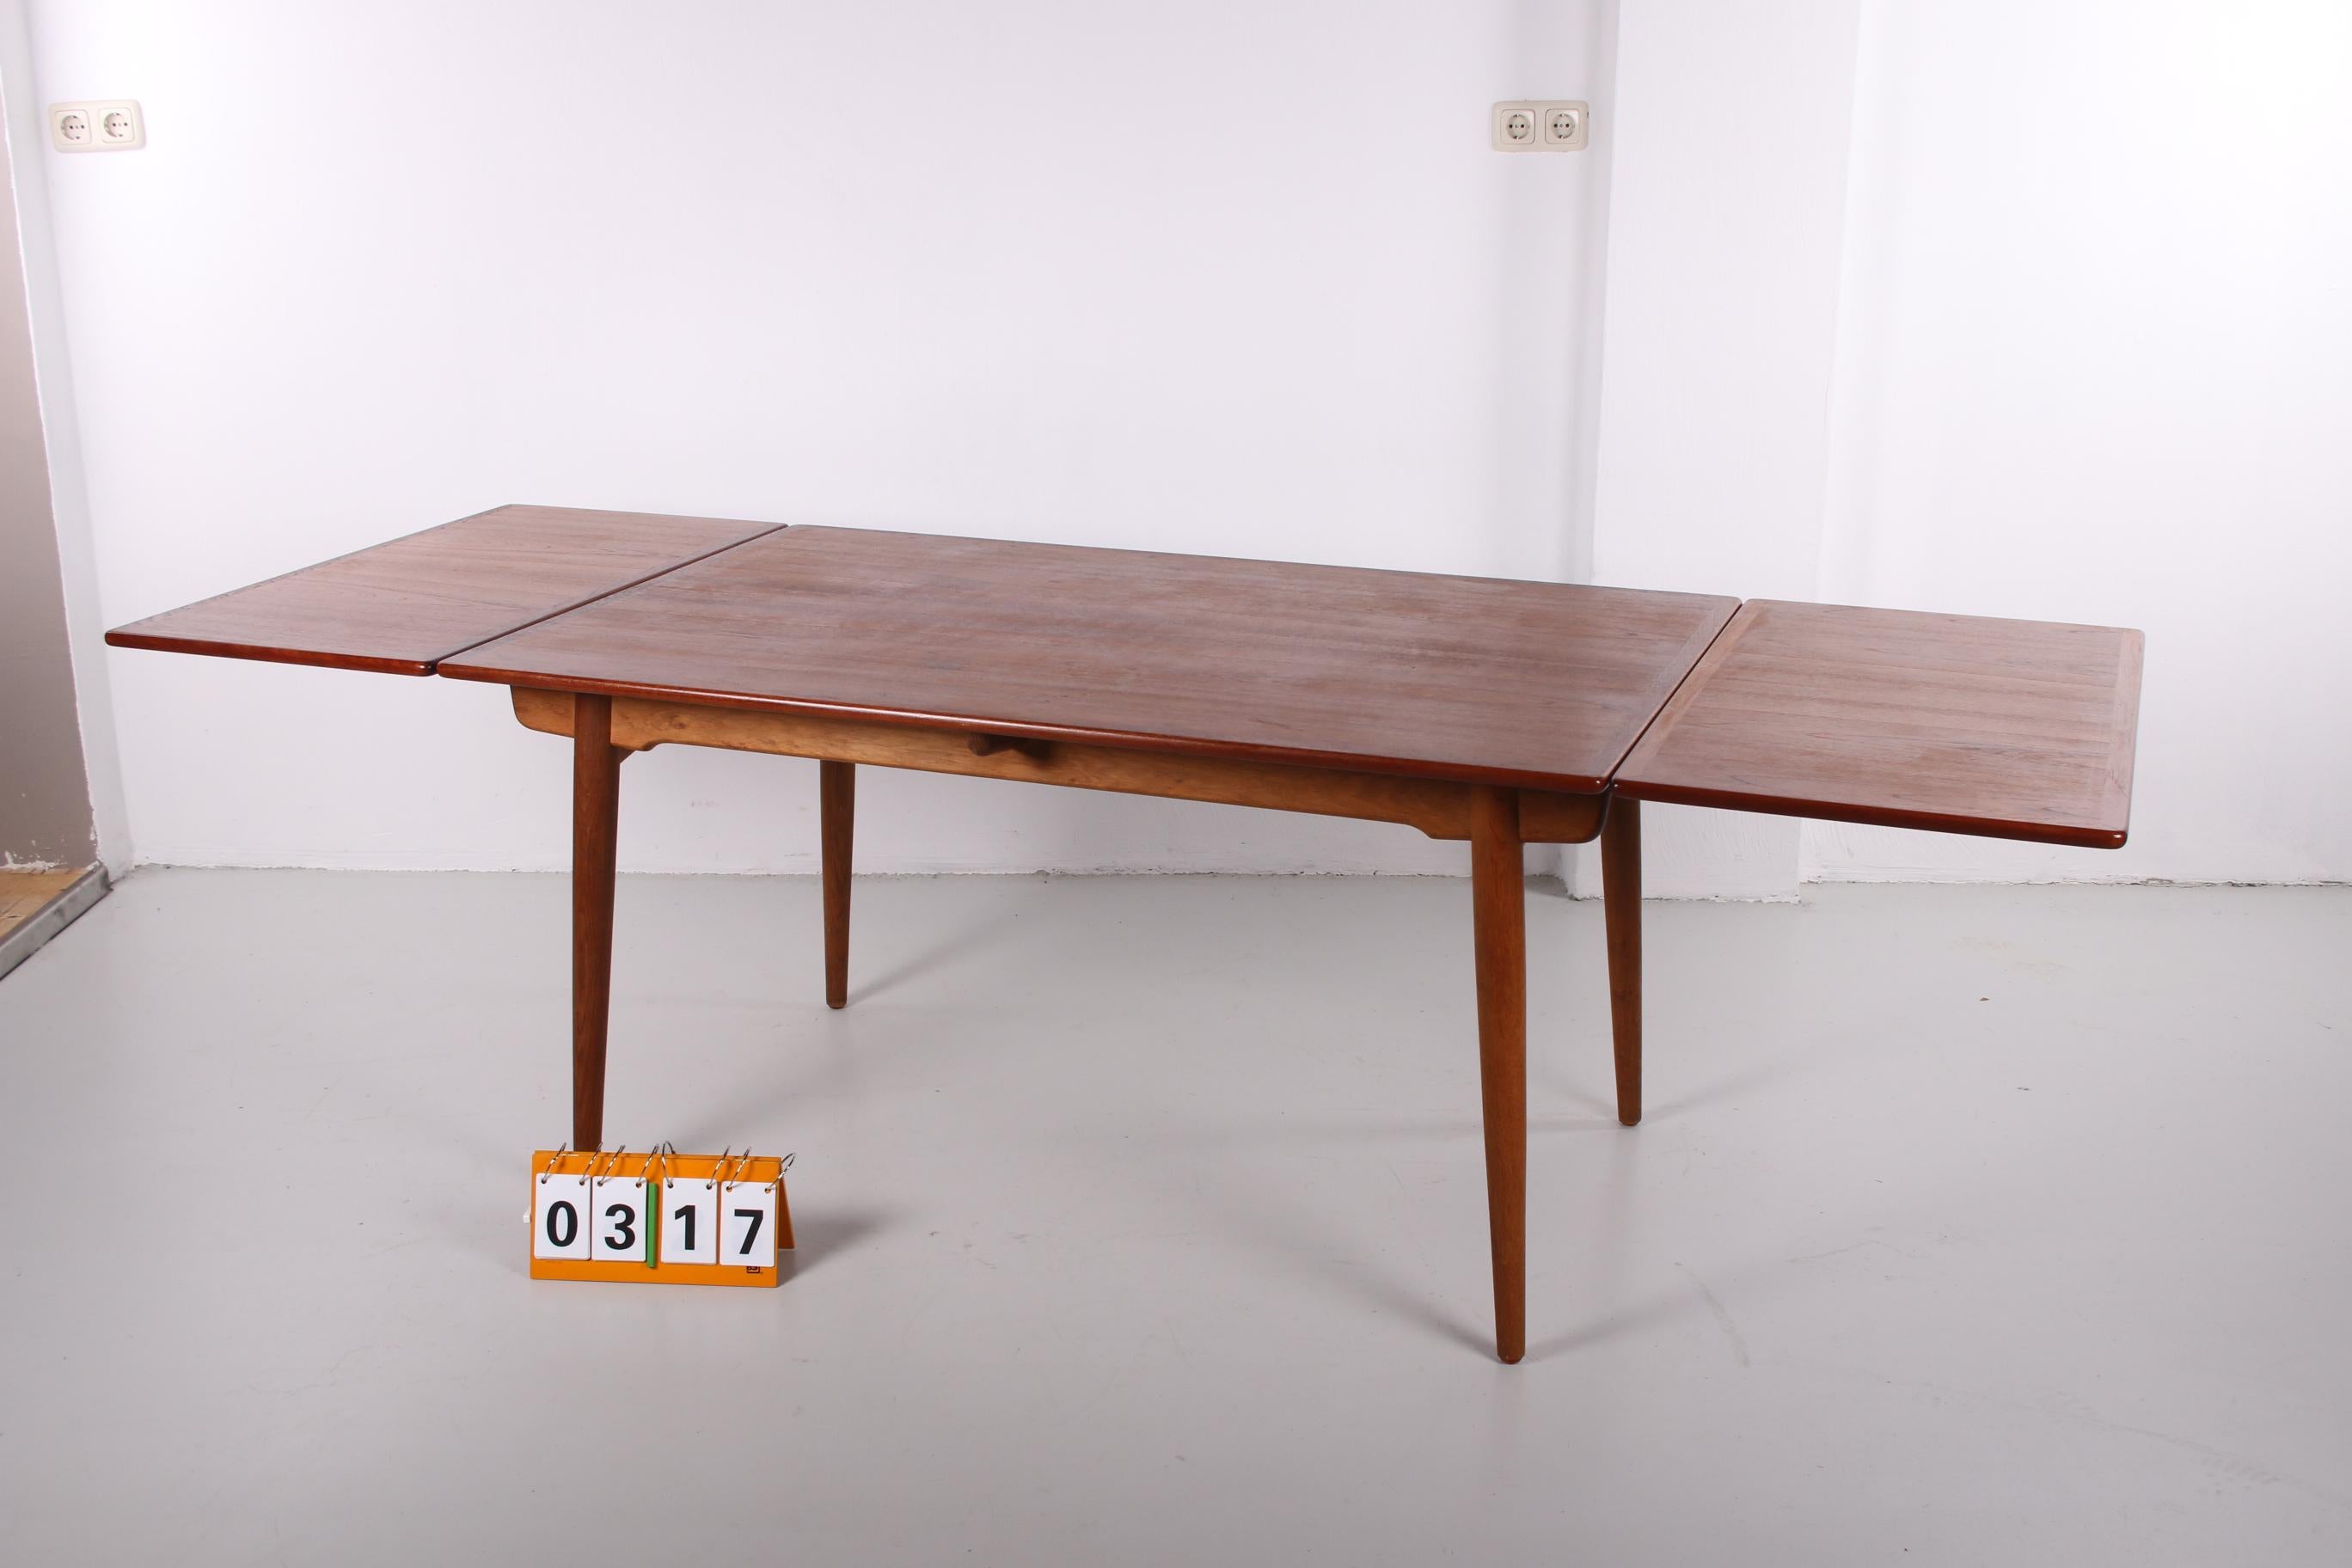 This is a beautiful rare large edition of model AT 312. A dining table designed by Hans J. Wegner, produced by Andreas Tuck in Denmark. Equipped with 2 extension leaves of 60 cm each. Legs in solid oak, table top in teak. In perfect condition.